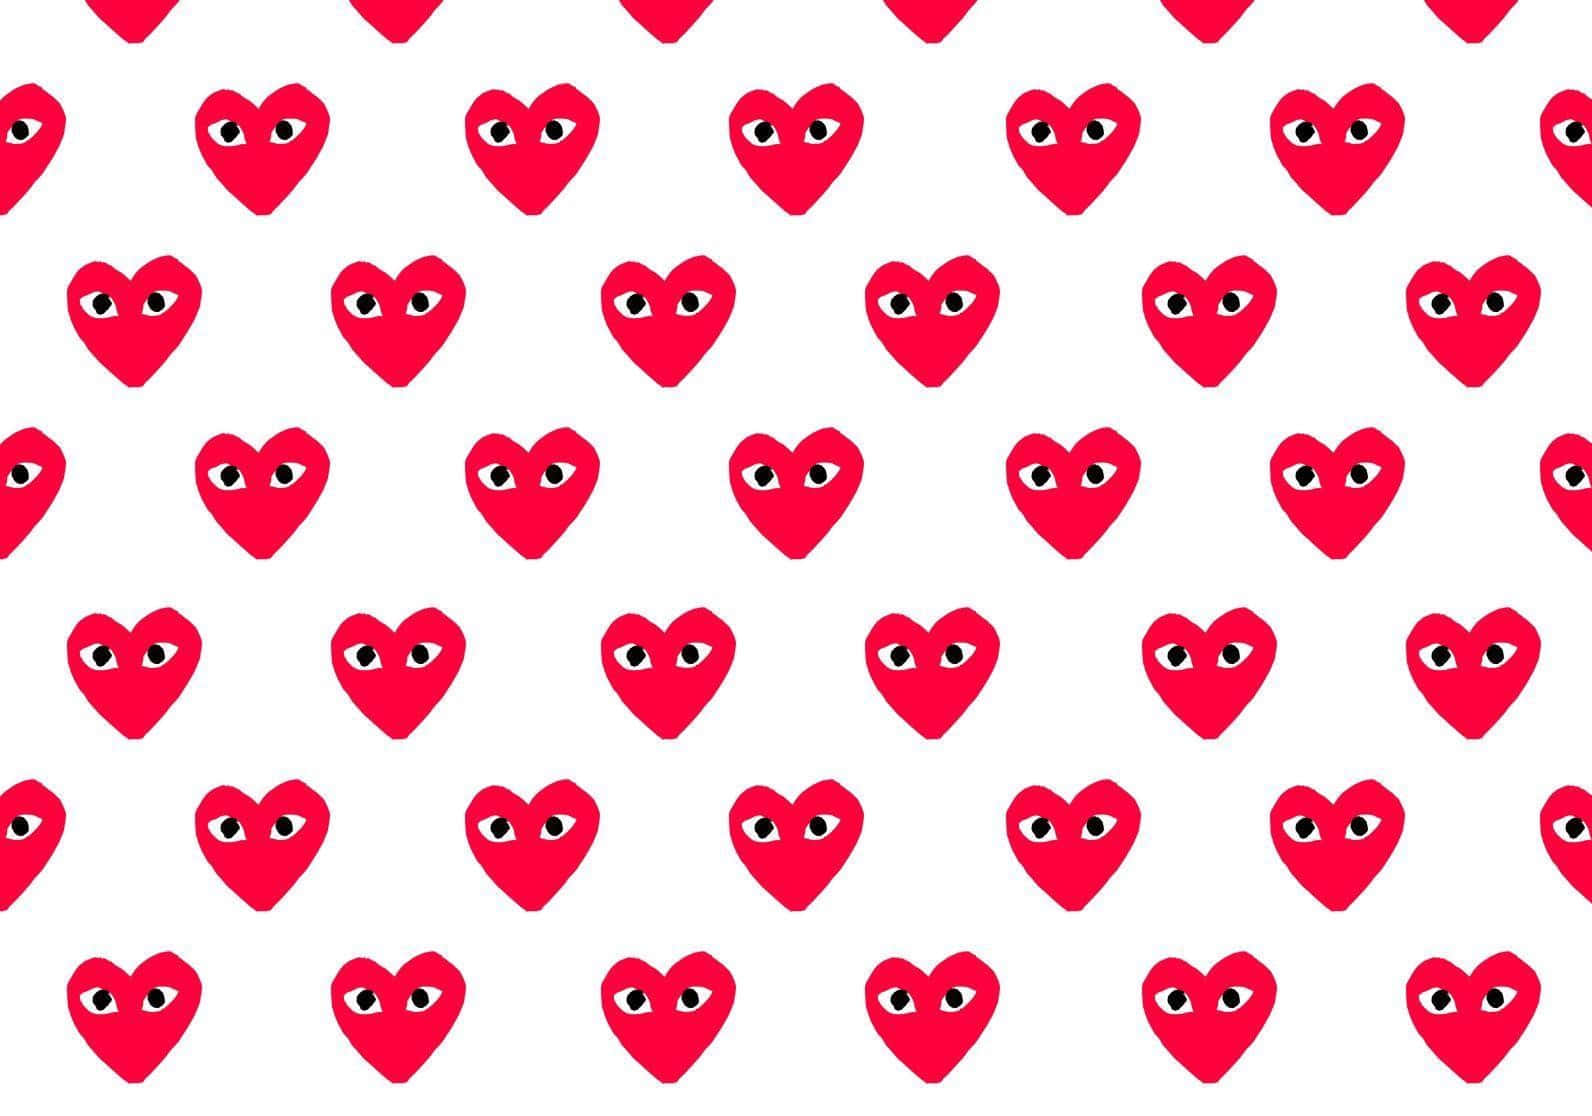 Download A Red Heart With Black Eyes On A Beige Background Wallpaper   Wallpaperscom